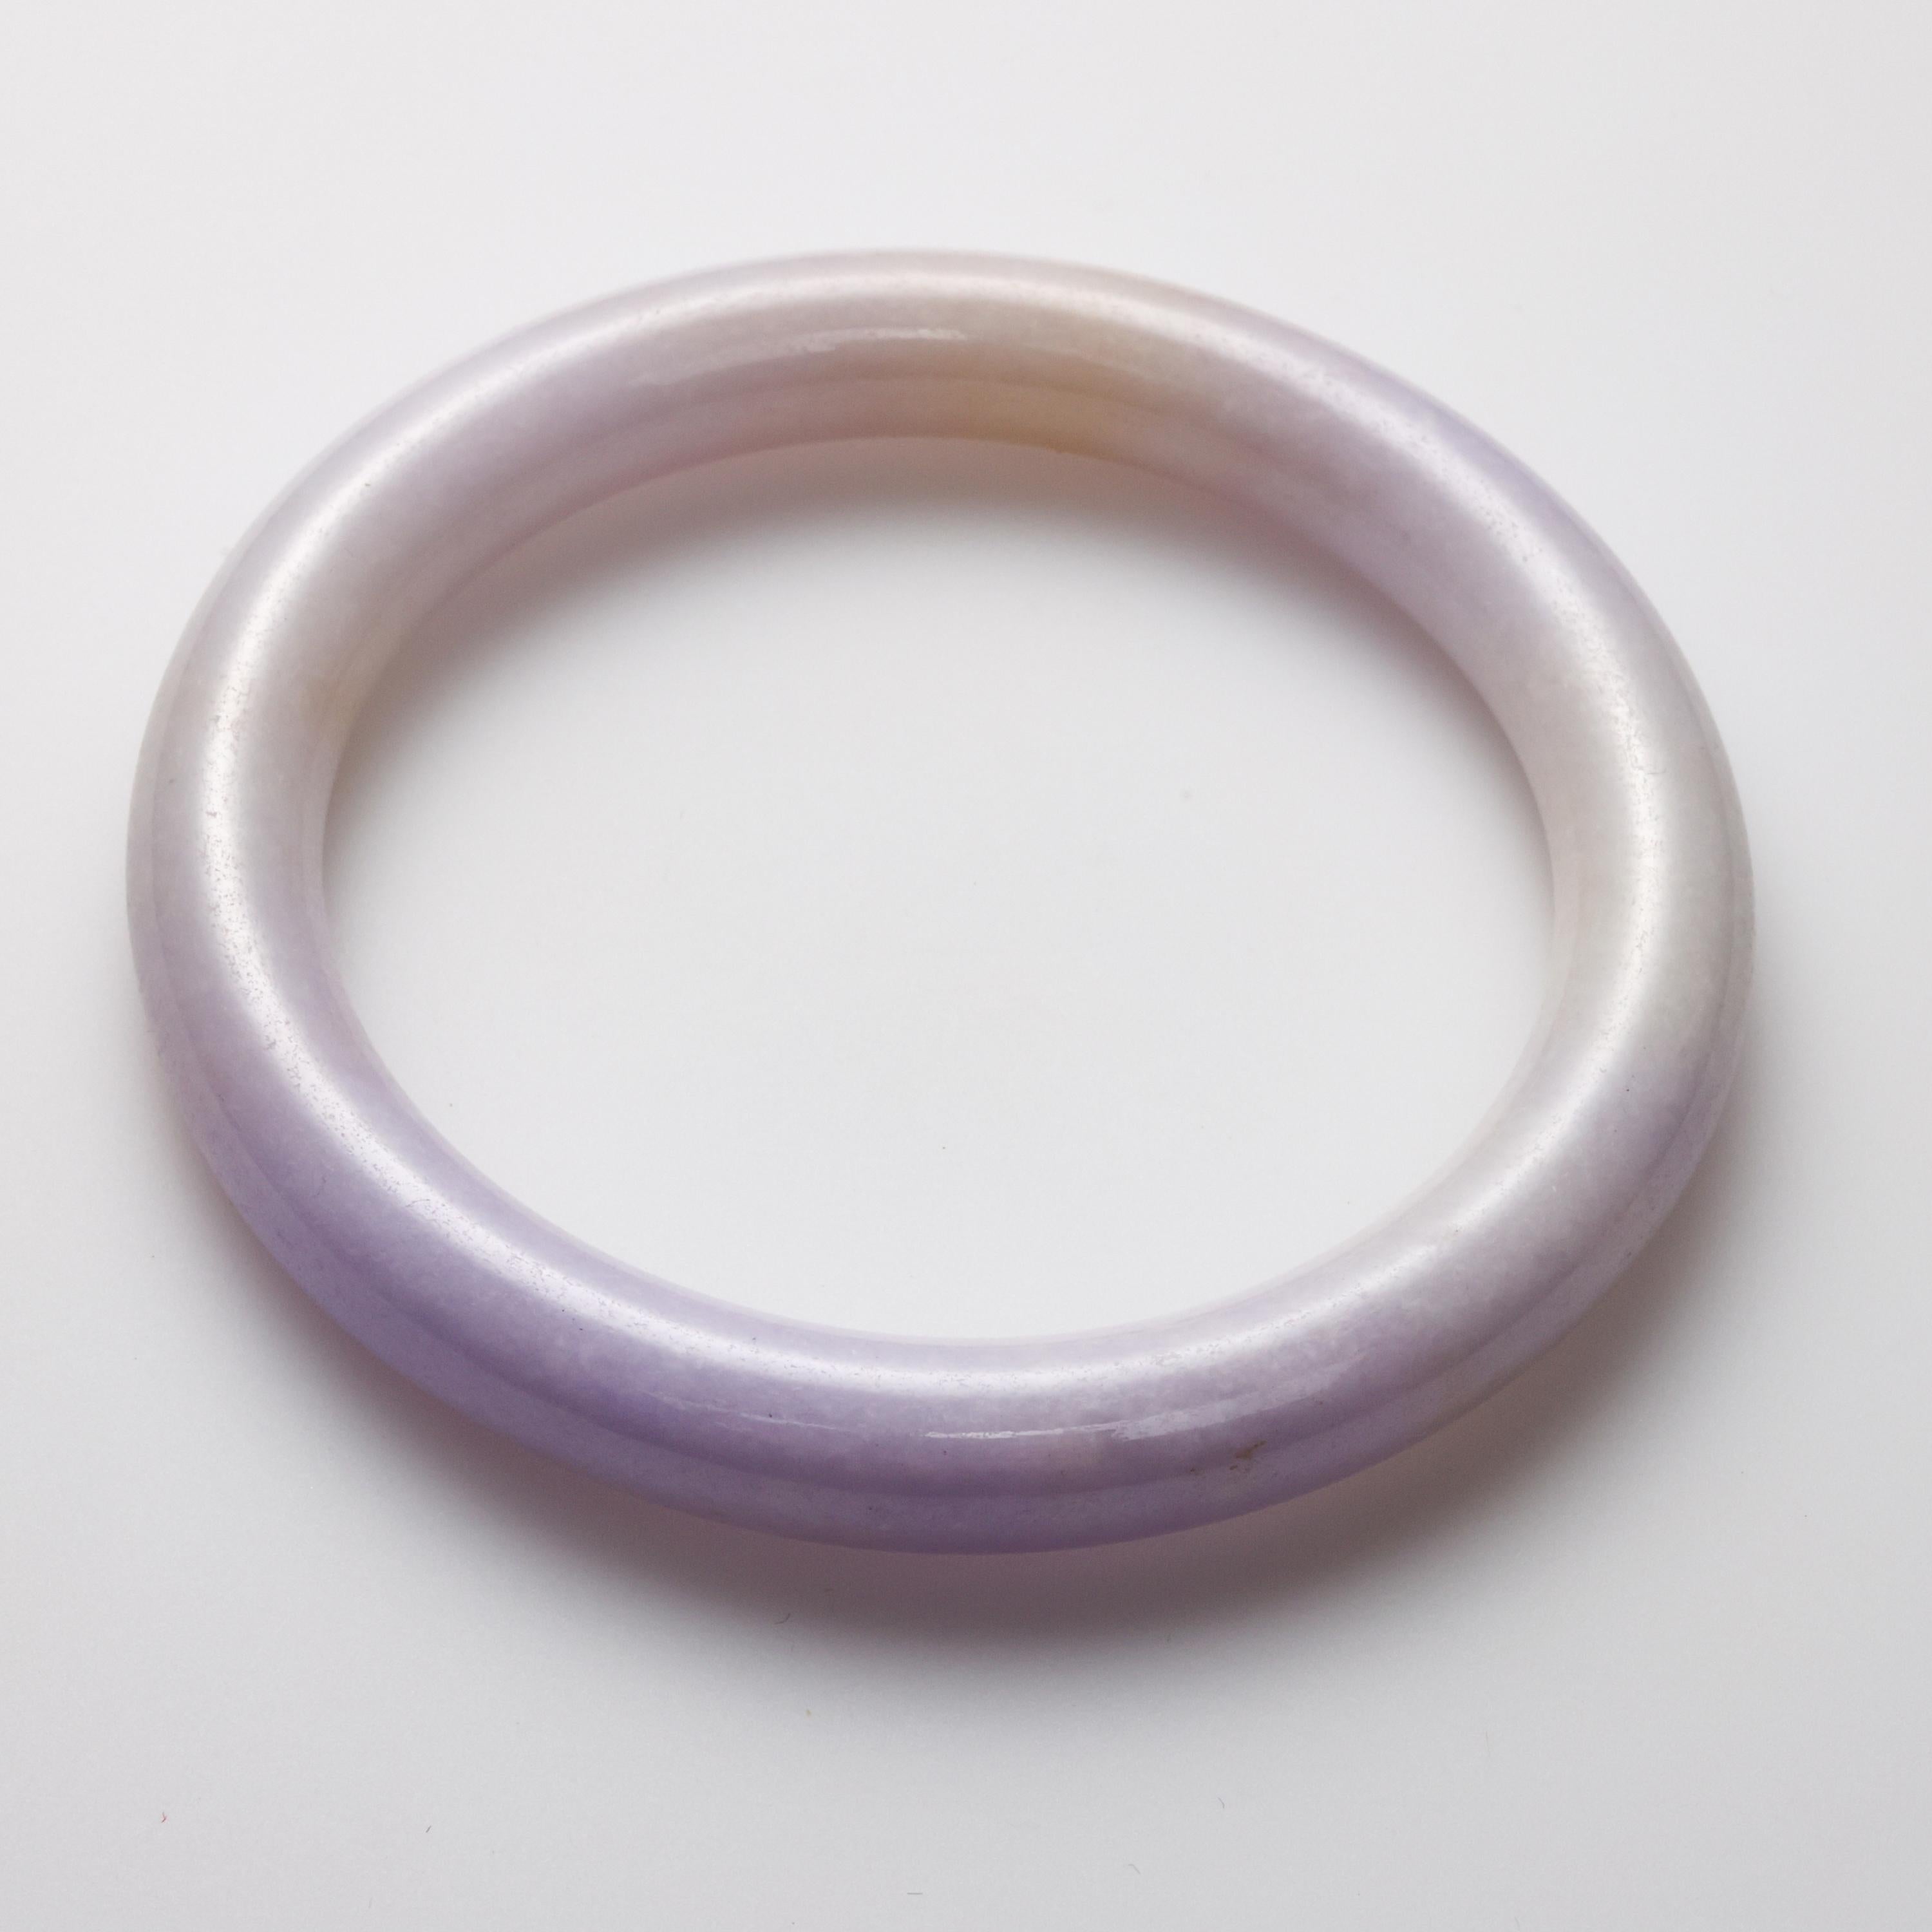 This hand-carved round, pale violet to near-colorless lavender jade bangle is luminous and ethreal. Sometimes appearing nearly white, in shadows it glows light purple. Absolutely stunning. 

Measuring 69.9 x 8.8mm, the bangle has an inner diameter